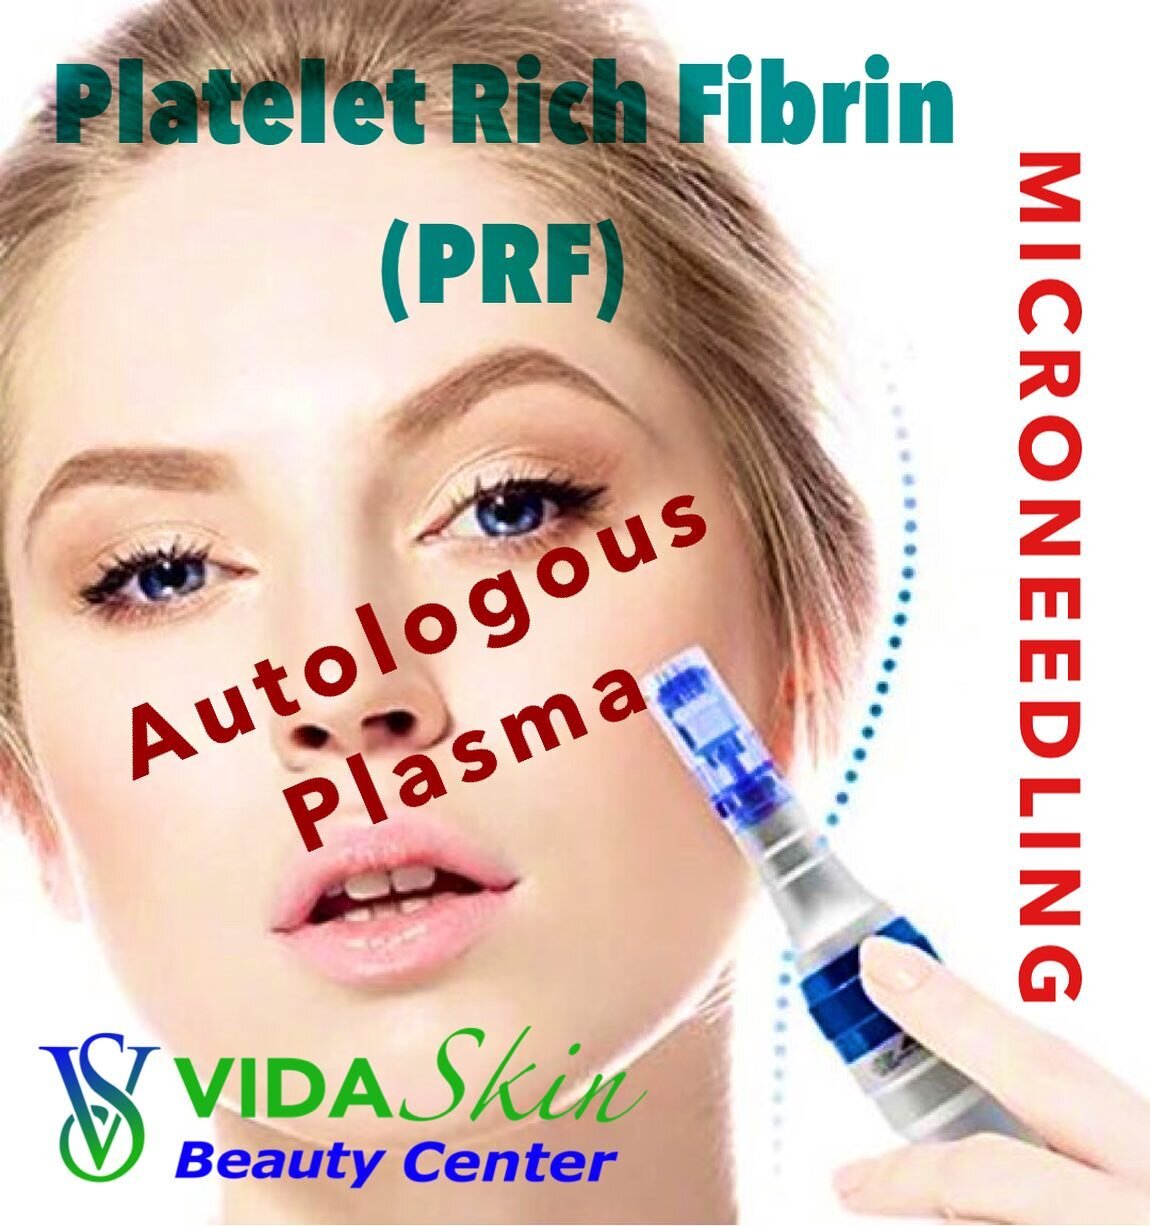 PRF Microneedling, with organic Autologous Plasma, knows as Platelet Rich Fibrin (PRF).
▫️
PRF (2nd generation PRP)
▫️
Skin Rejuvenation,
Collagen Production
Skin tightening,
Increases Glow,
Improves Acne,
Improves Wrinkles,
Reduces pores,
Reduces su